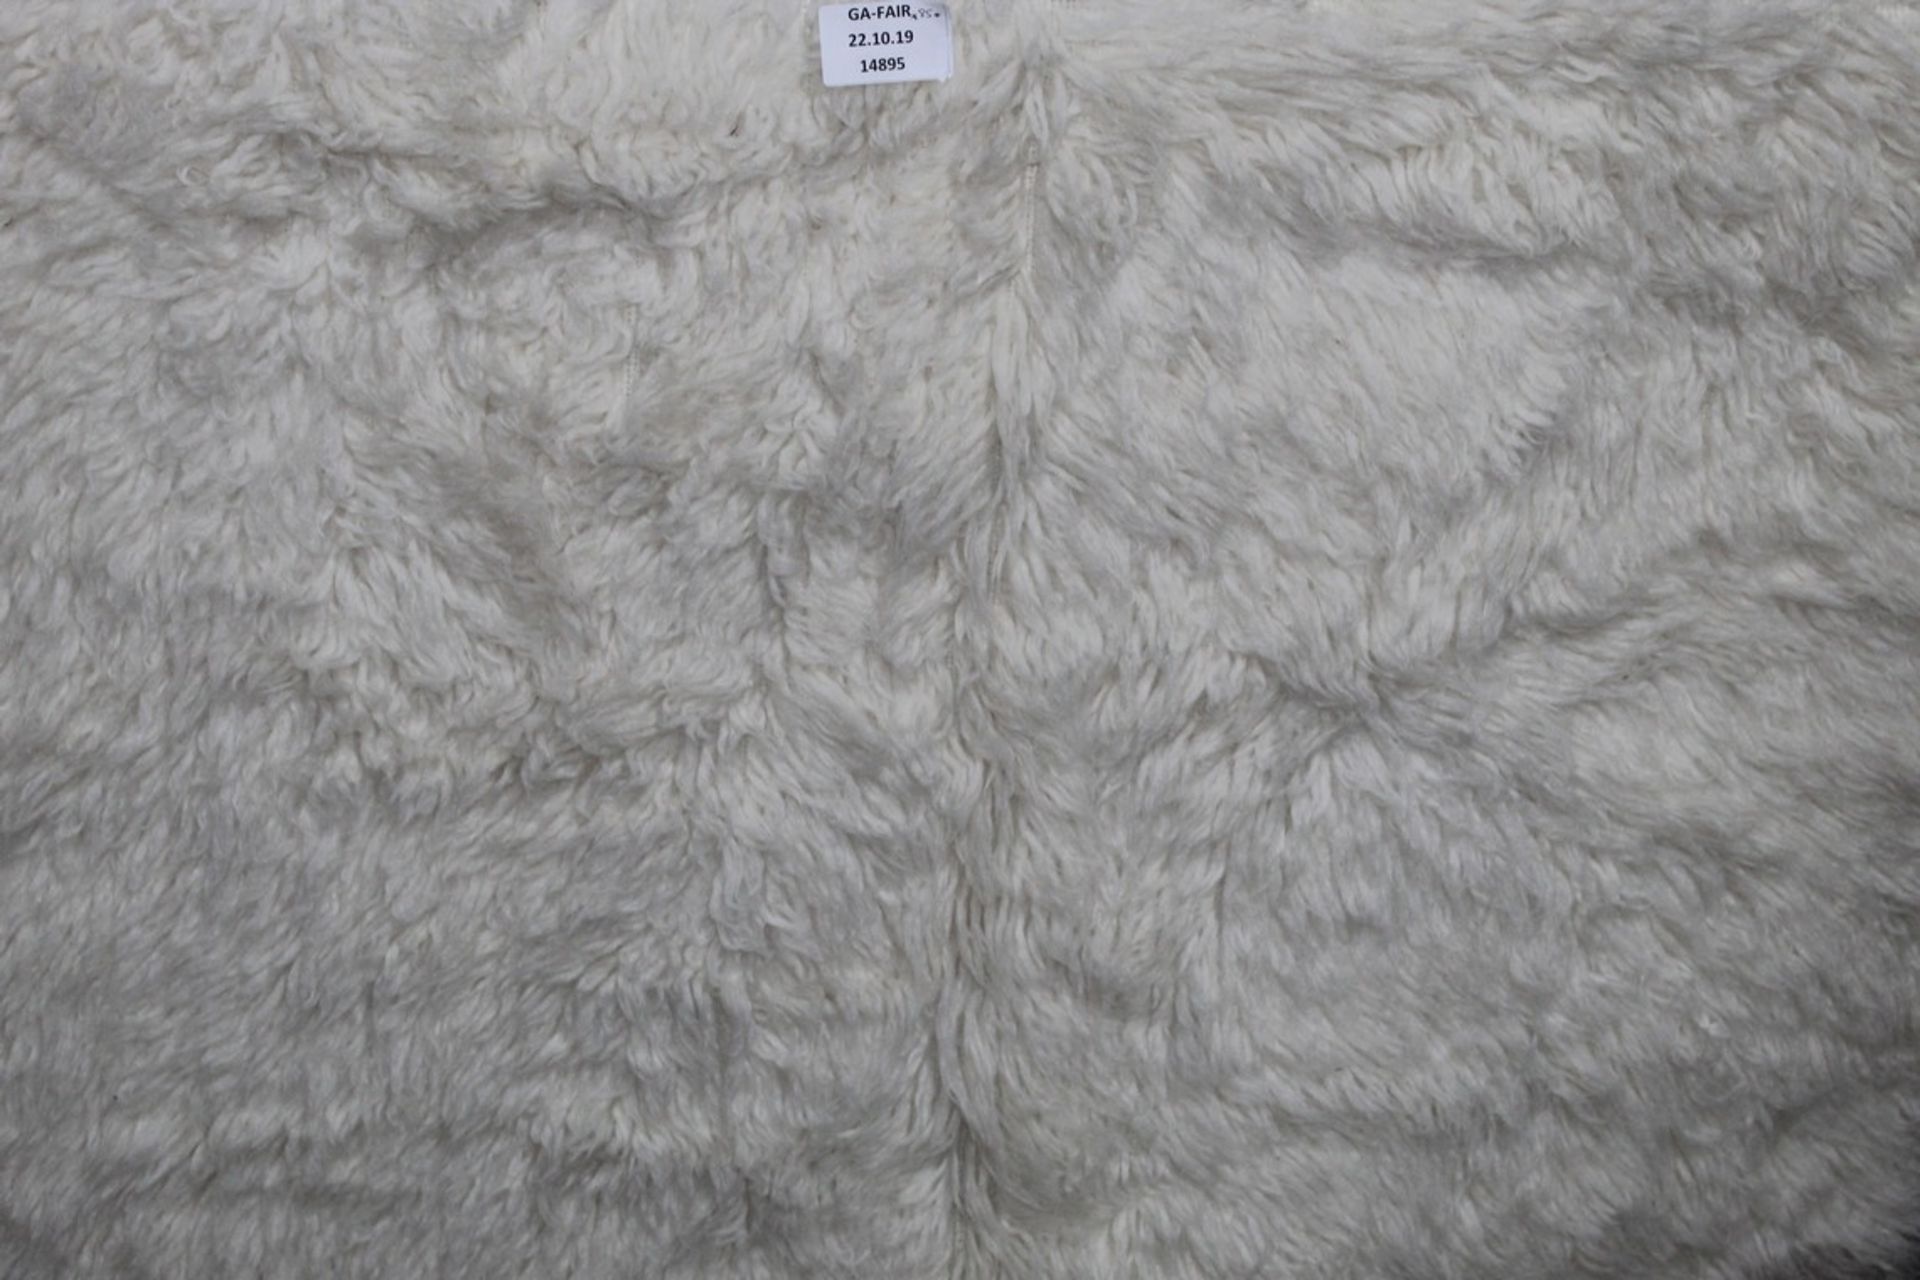 Large Artificial Fur Rug RRP £40 (14895) (Public Viewing and Appraisals Available)